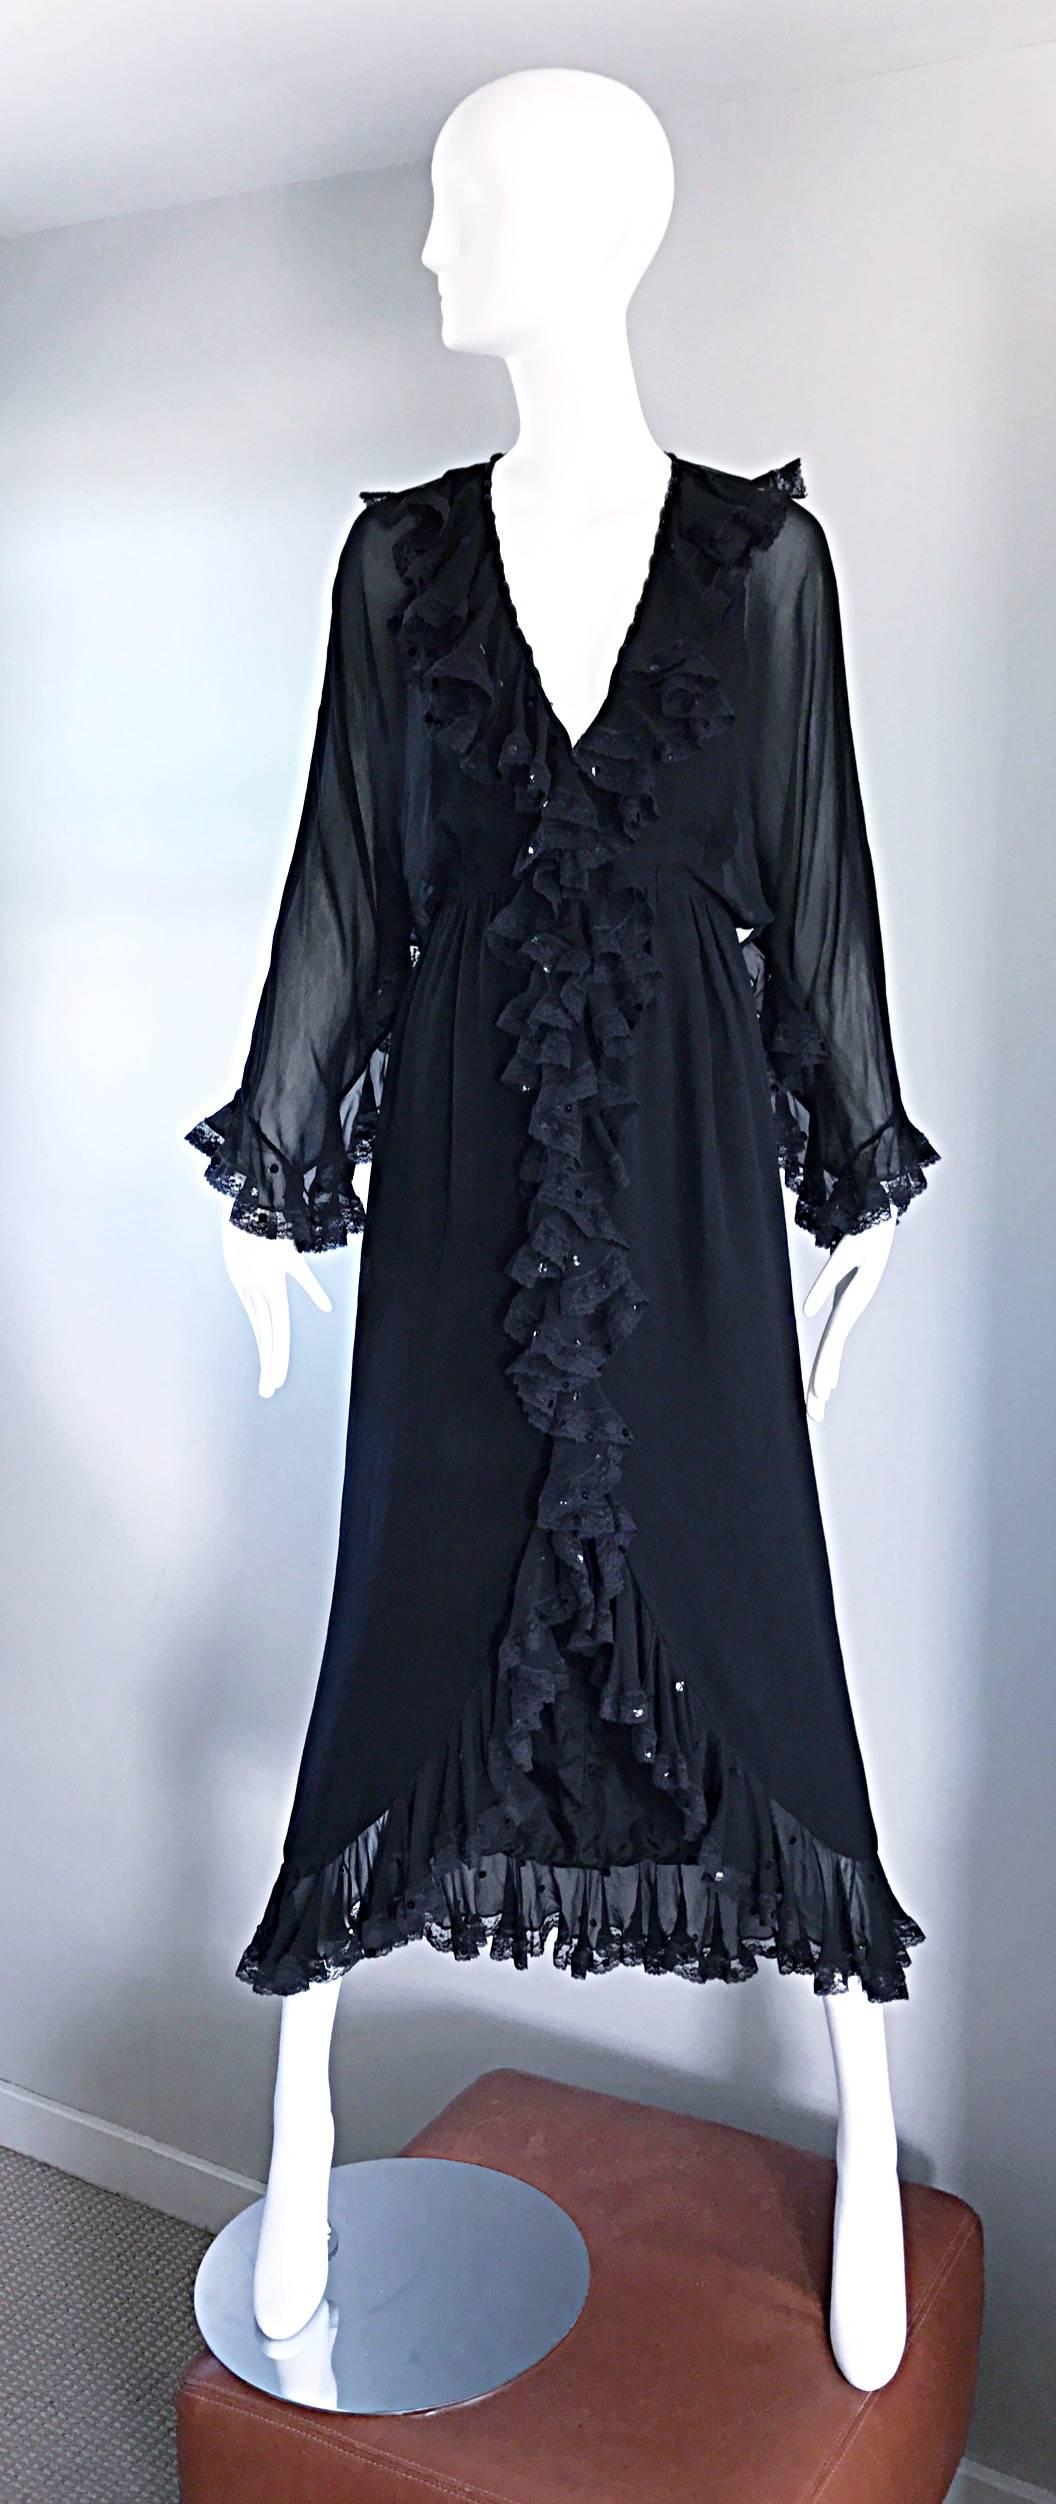 Absolutely beautiful vintage BILL BLASS 1970s black boho evening dress! Features semi sheer dolman sleeves, with chantily lace trim. Matching lace trims the collar and down the center of the dress. Black sequins hand sewn throughout, and intricate